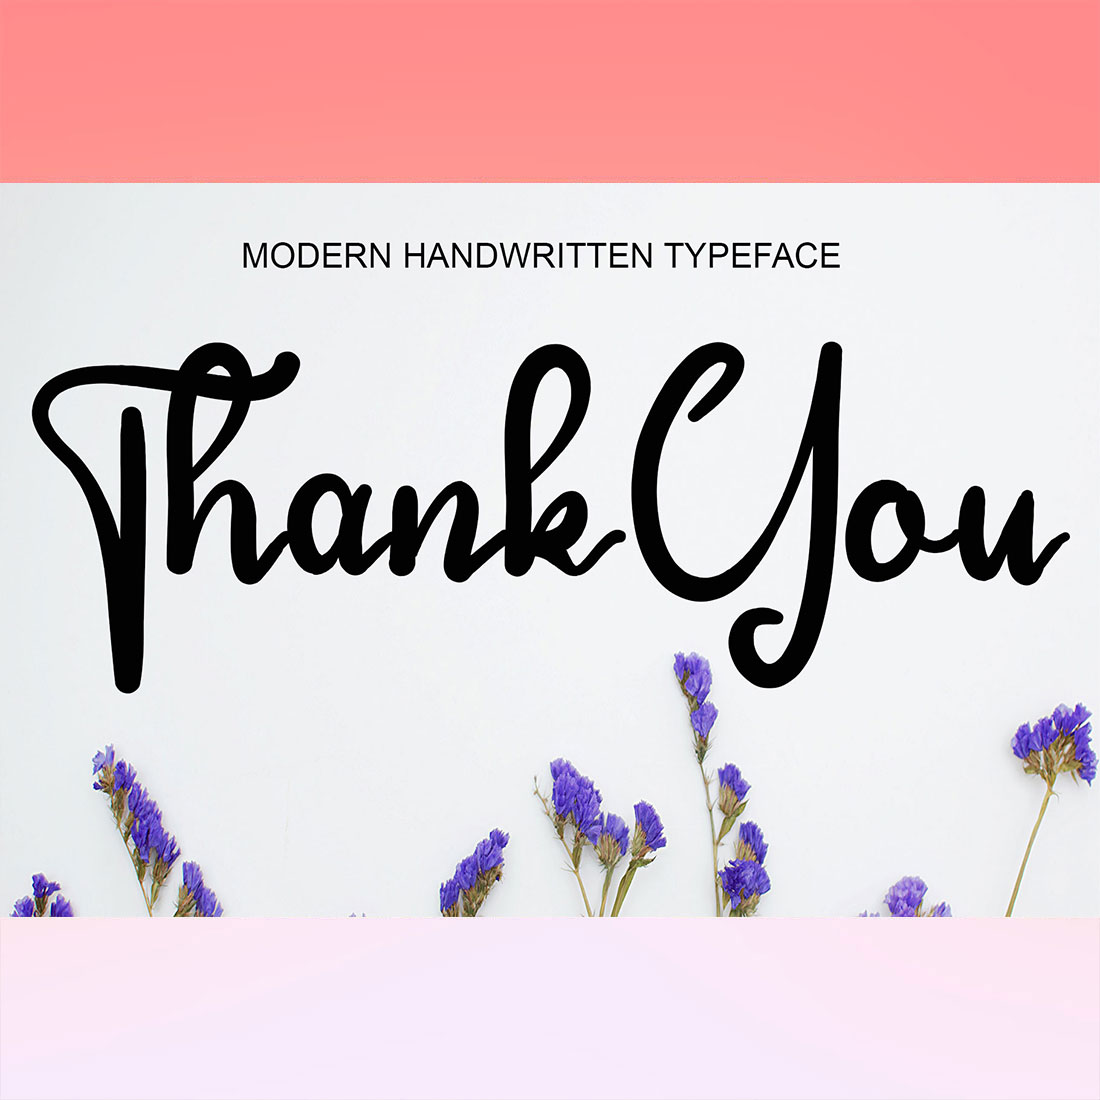 Thank card with purple flowers on it.